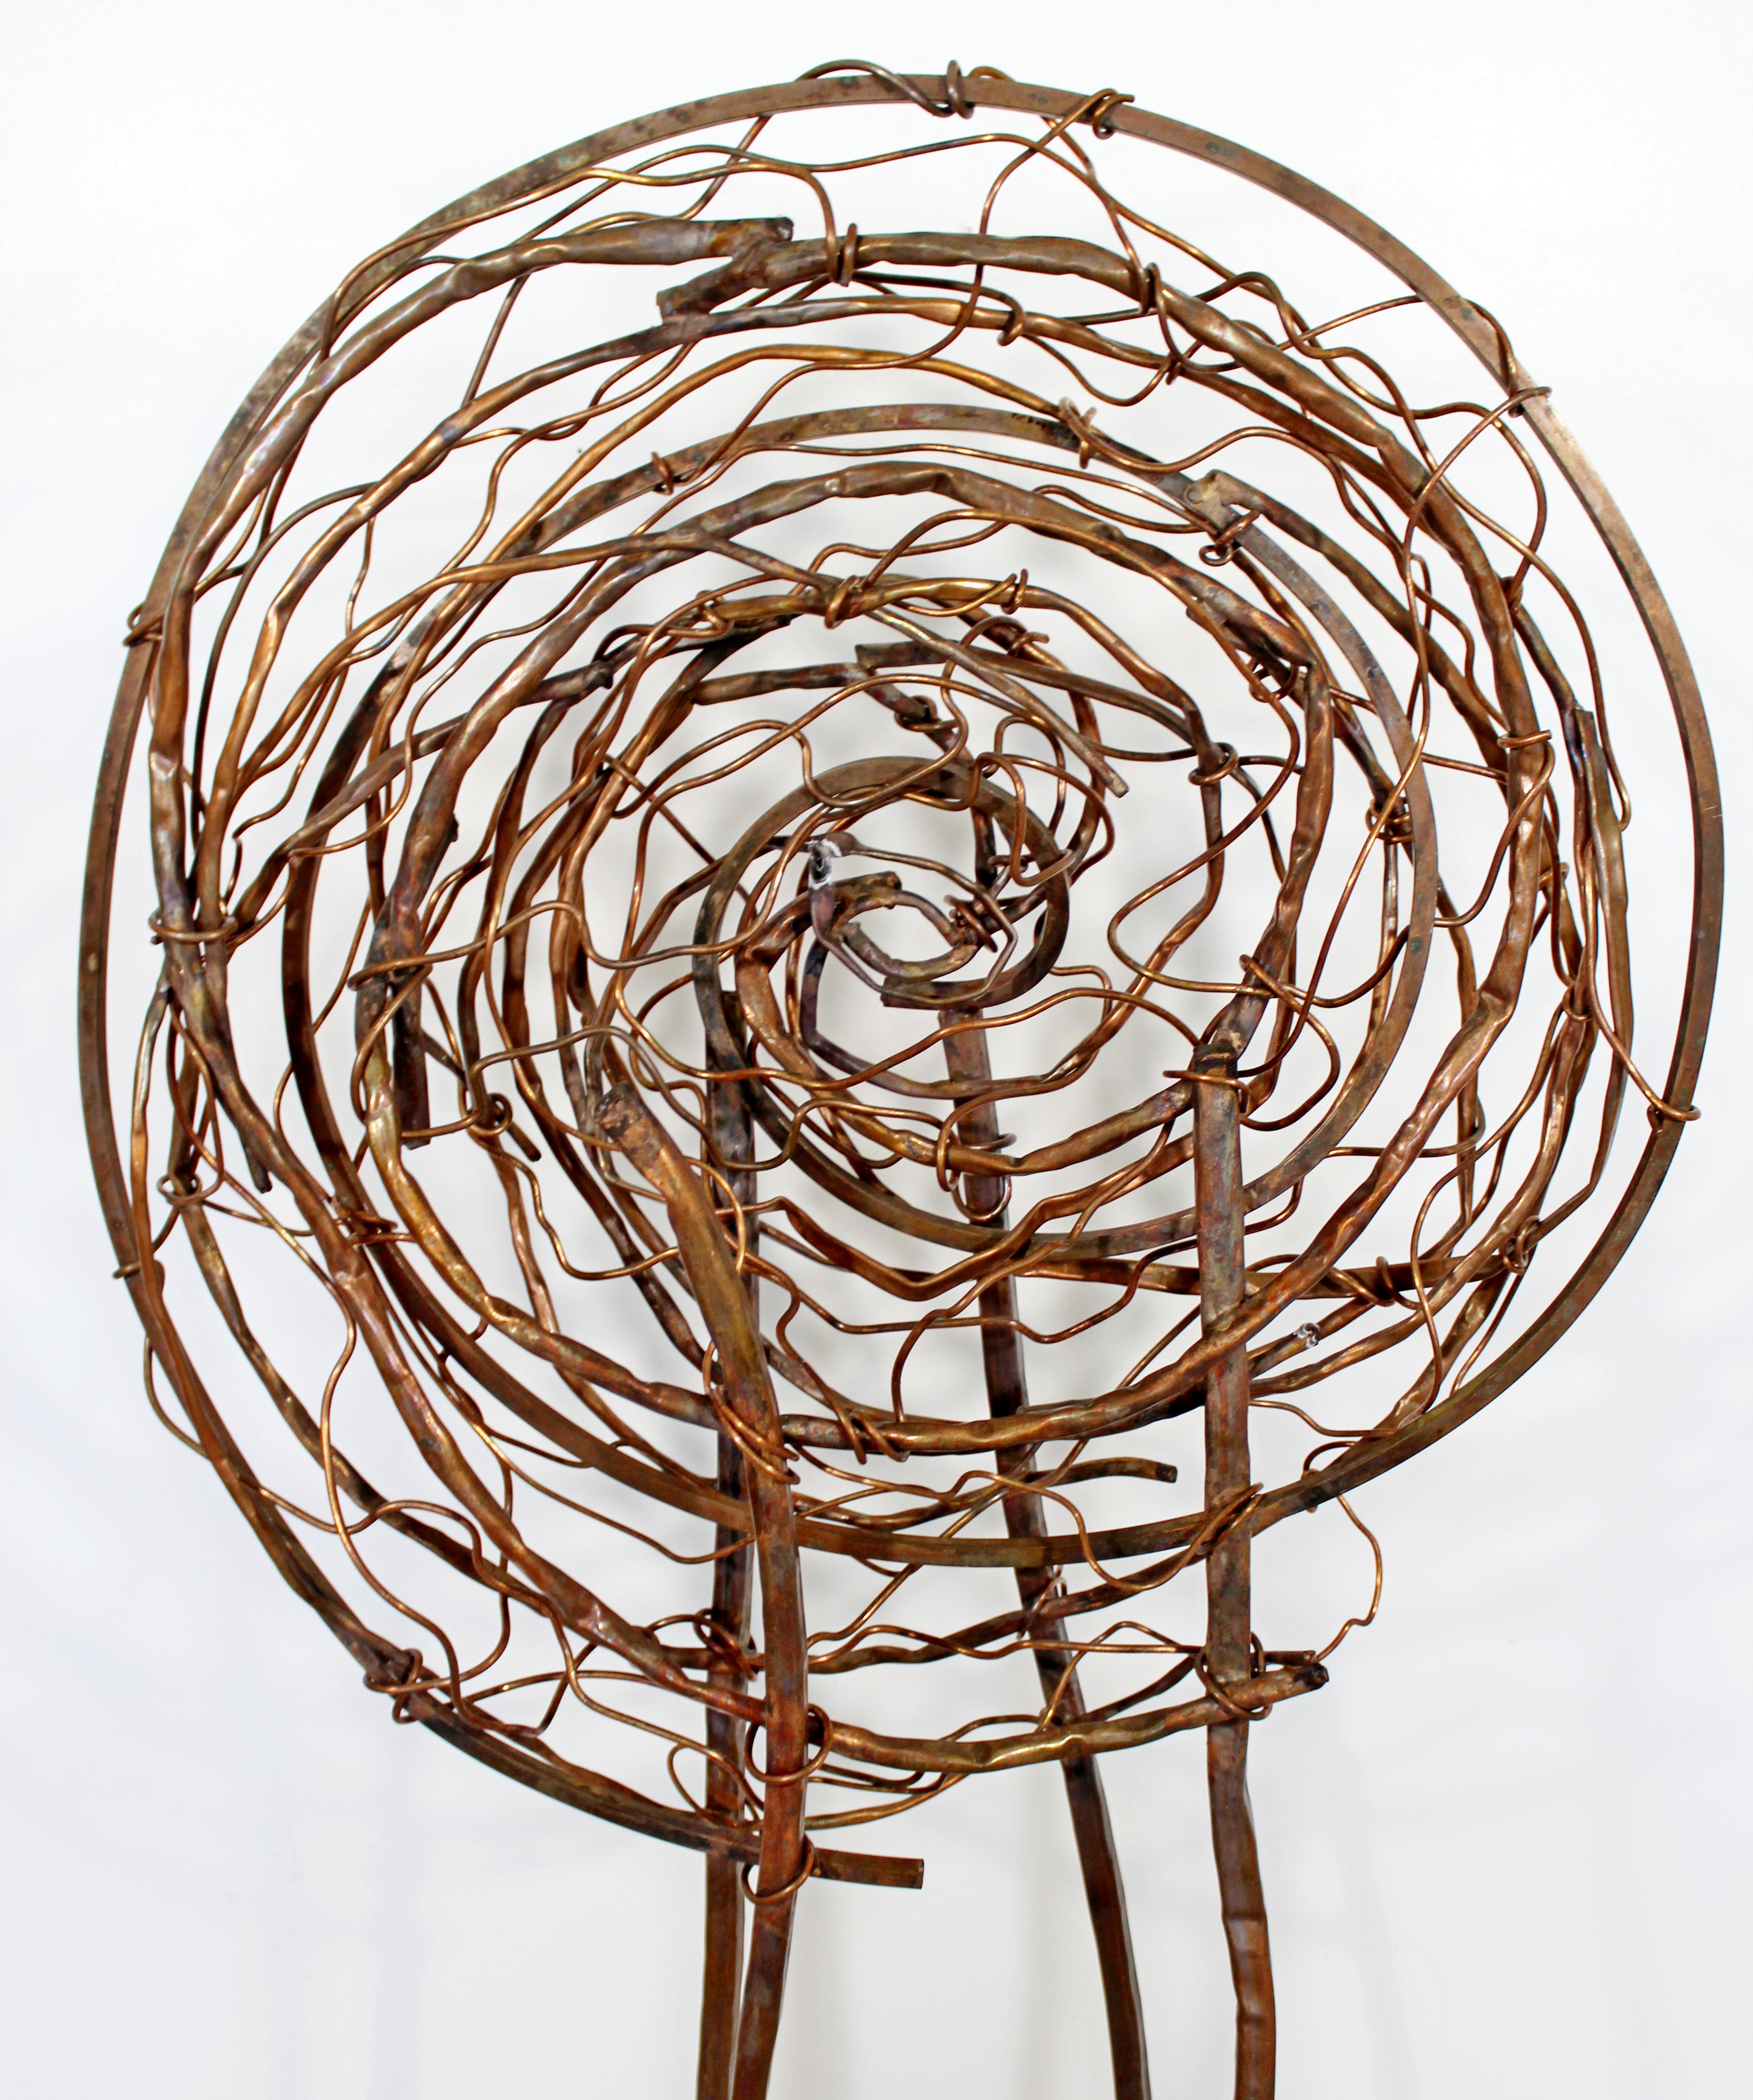 For your consideration is an incredible, forged copper metal, abstract floor sculpture, signed by Robert D. Hansen, dated 2019. In excellent condition. The dimensions are 26